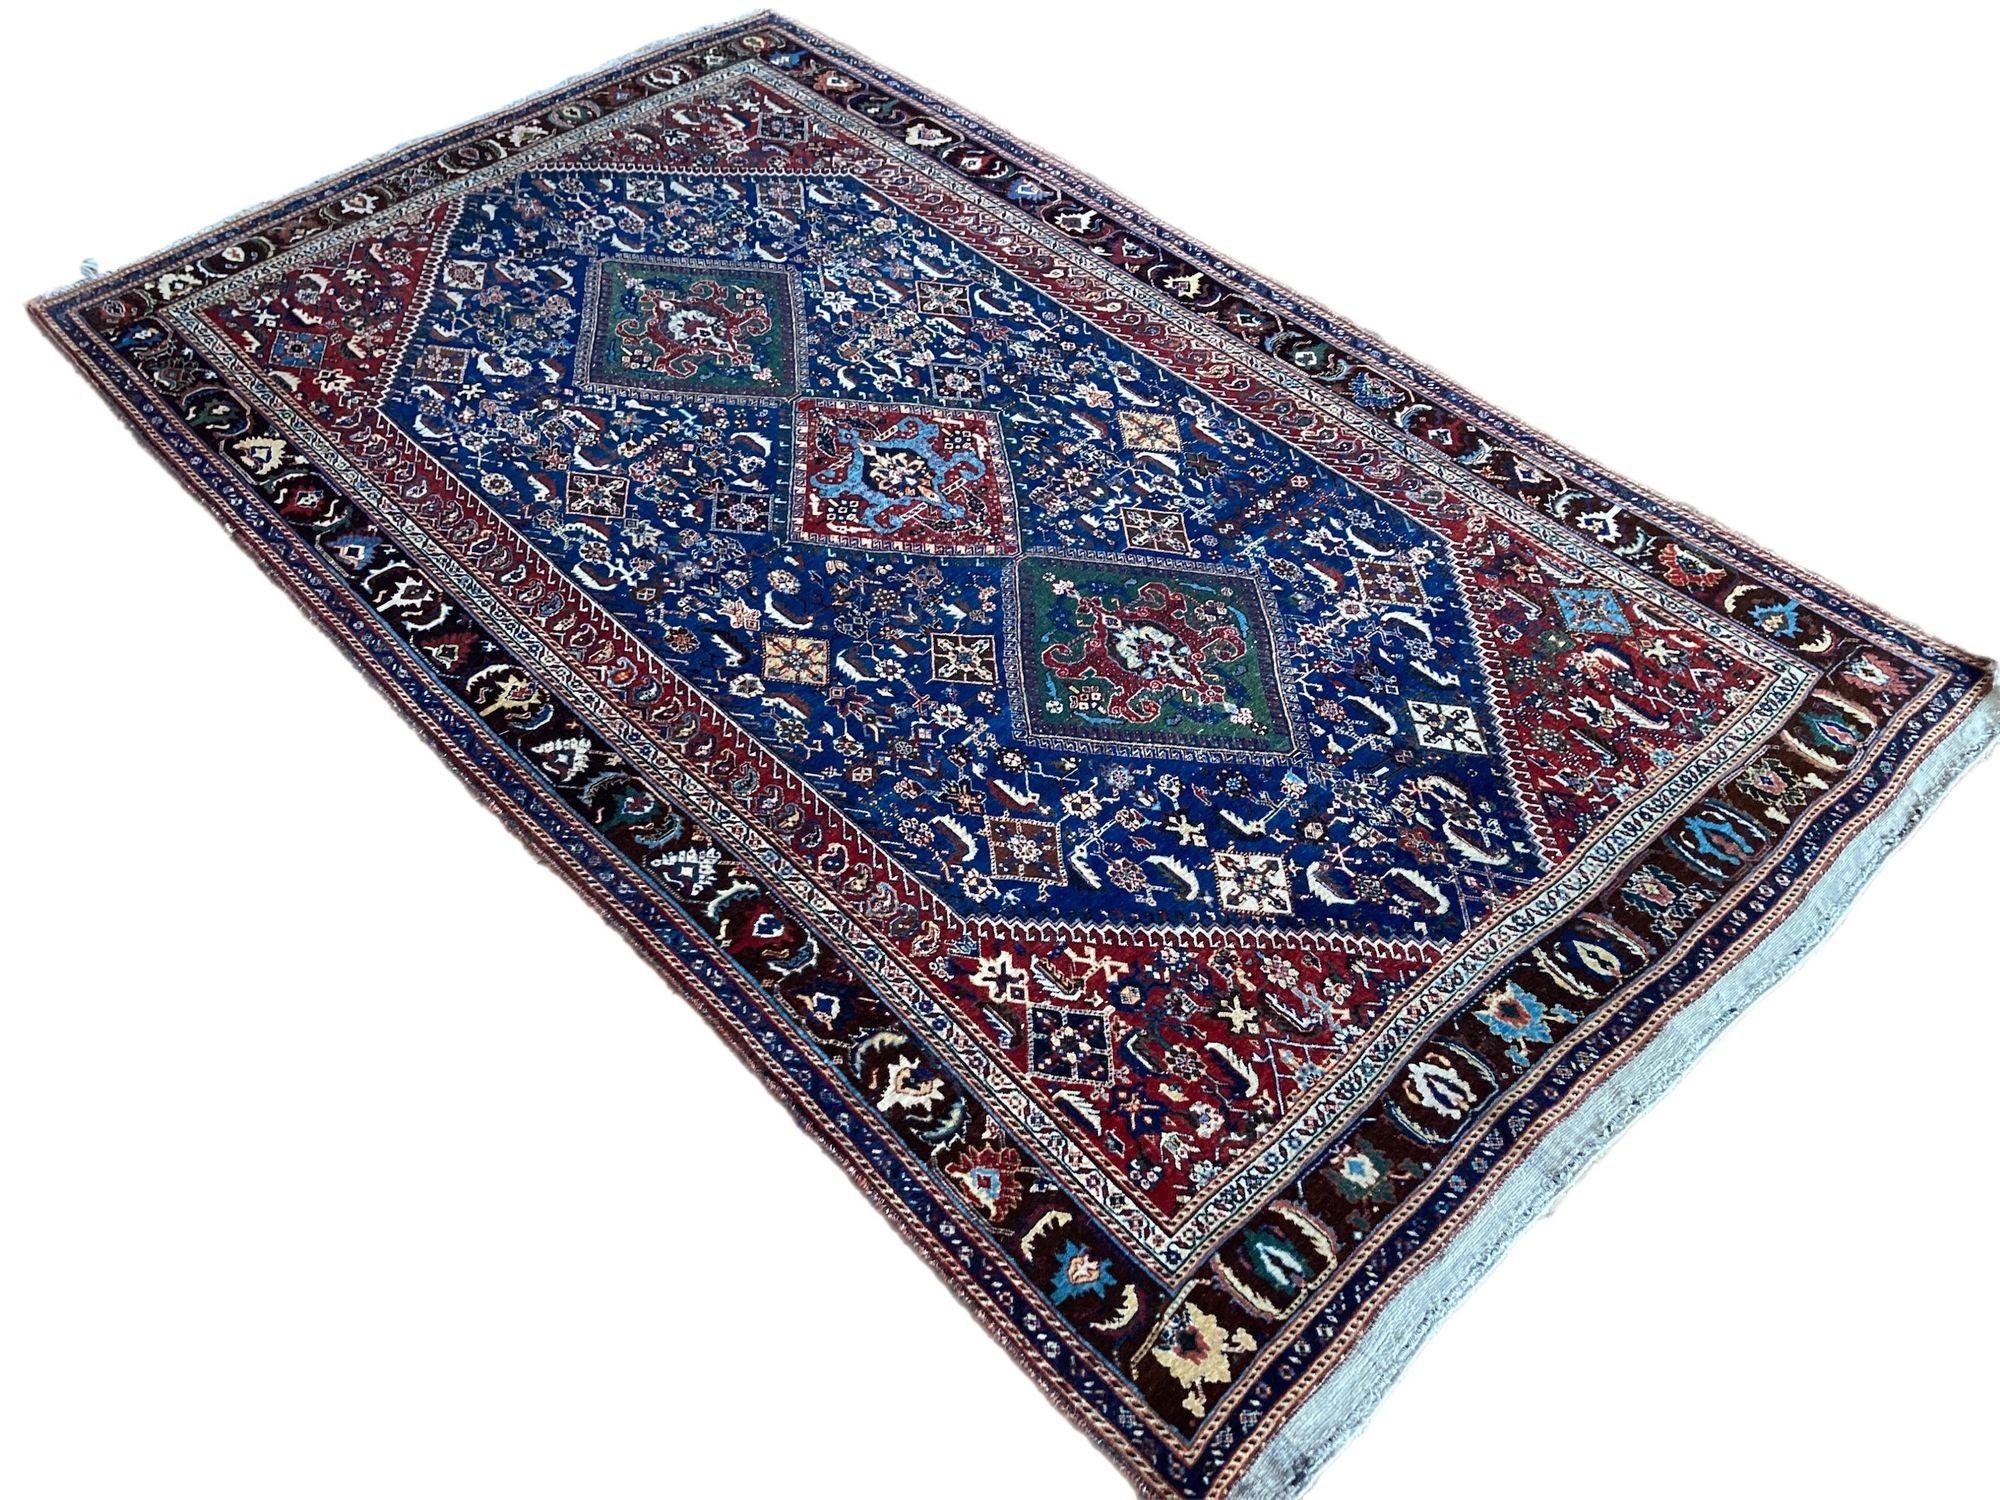 Antique Qashqai Rug 2.62m X 1.57m In Good Condition For Sale In St. Albans, GB